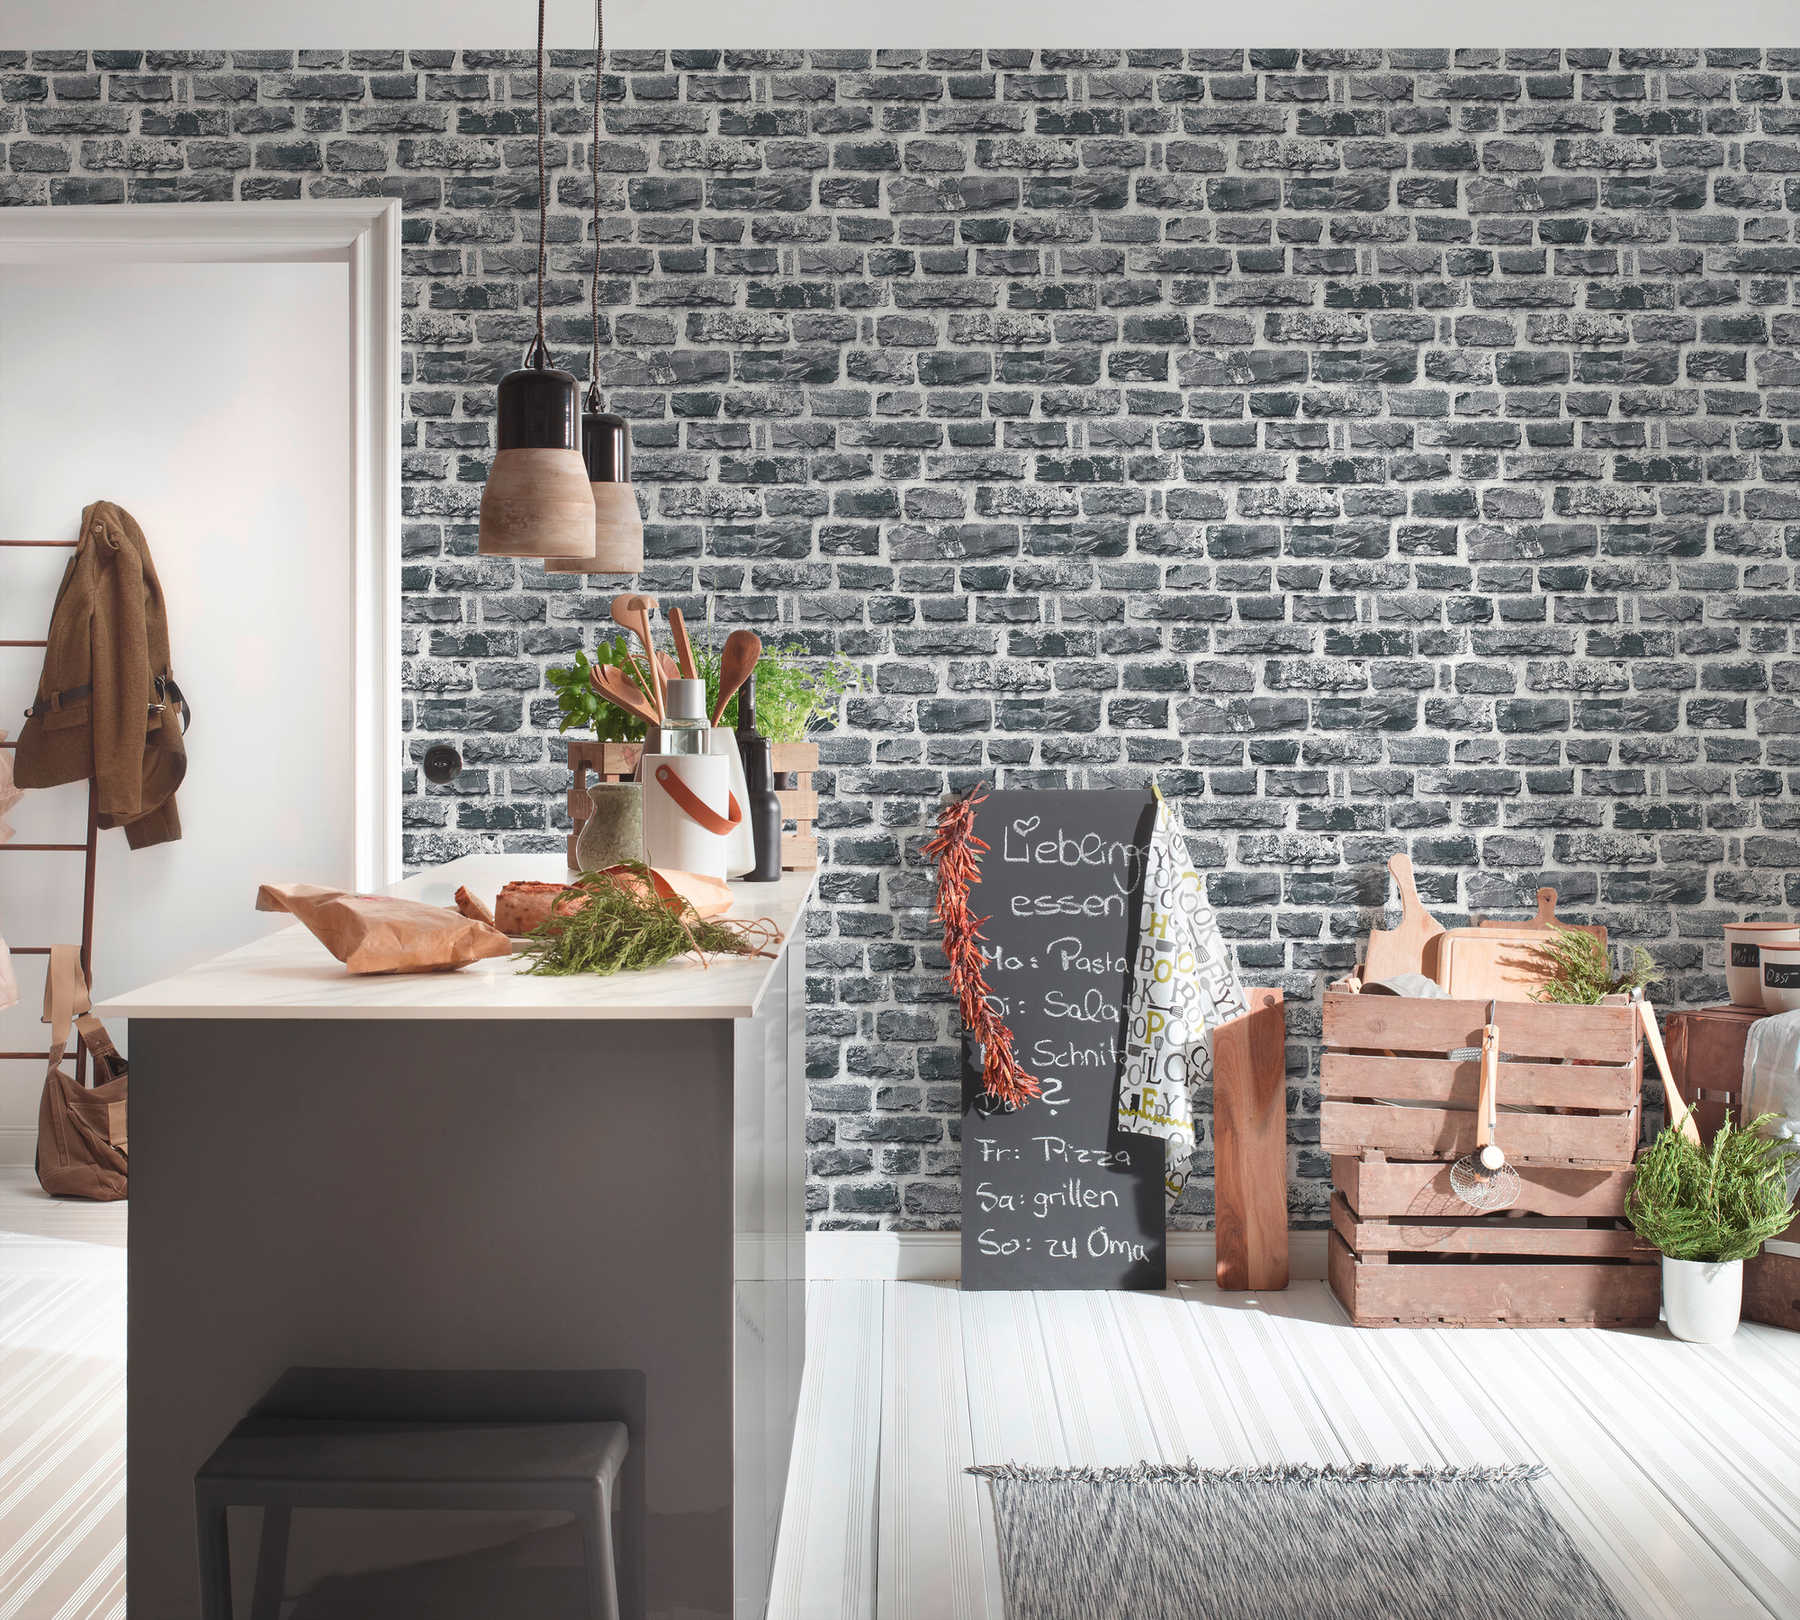             Wallpaper in stone look with quarry stones, natural stone - grey, black
        